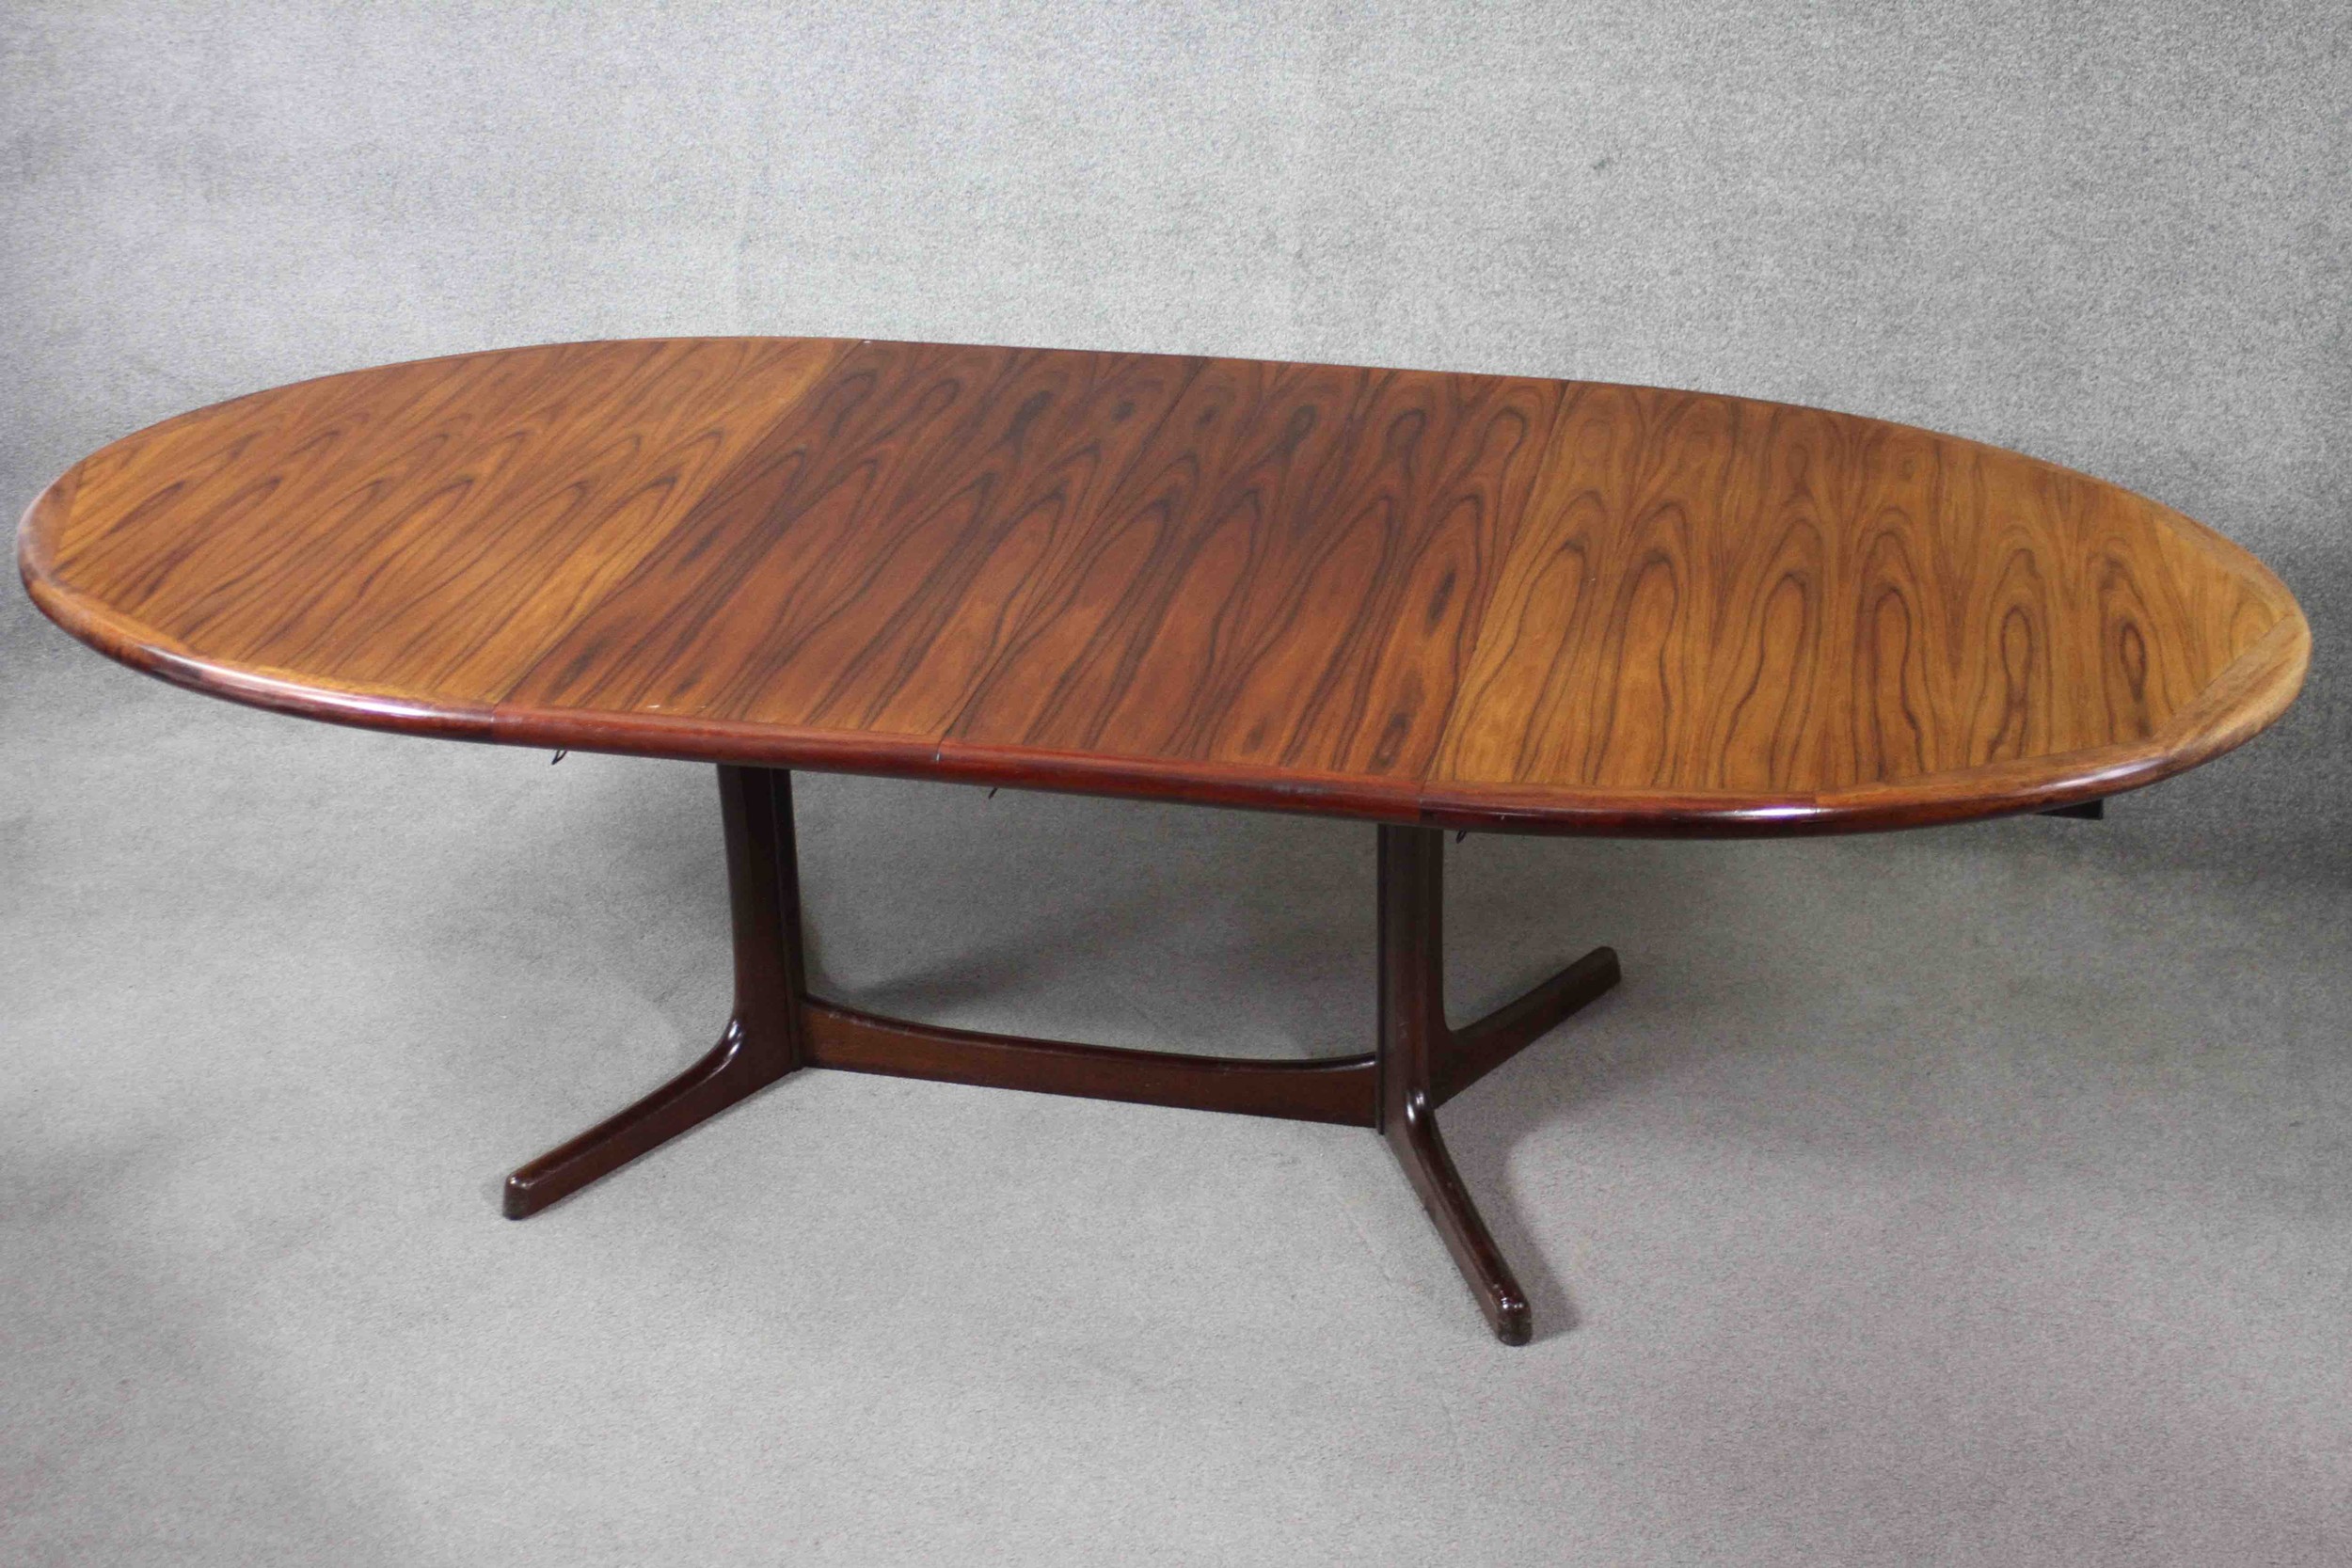 A vintage Danish dining table by Dyrland with two extra leaves and maker's label to the underside. - Image 5 of 7